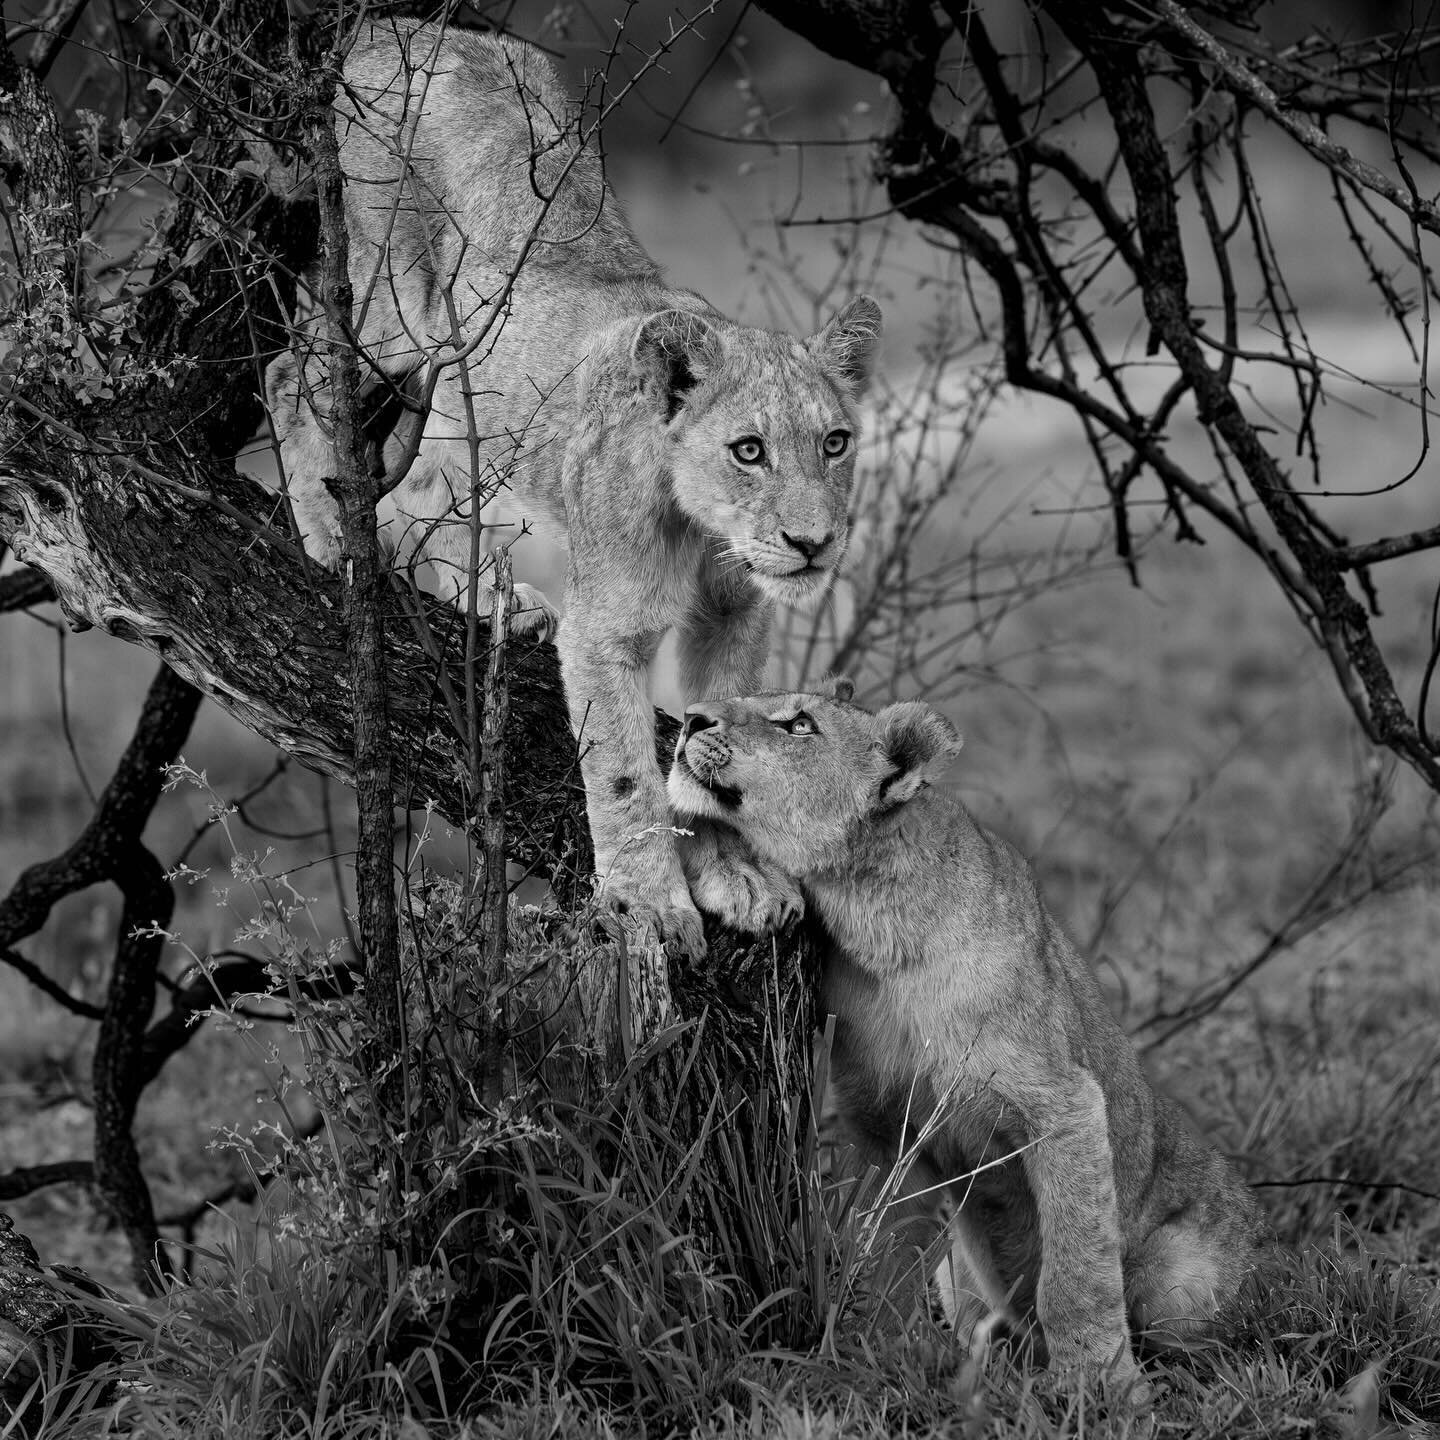 Just a couple of pals getting ready to cause trouble. 
.
.
#southafrica #malamala #allifaricyphotography #africa #wildlifephotography #canonusa #bigcatsofinstagram #lions #blackandwhitephotography #monochrome